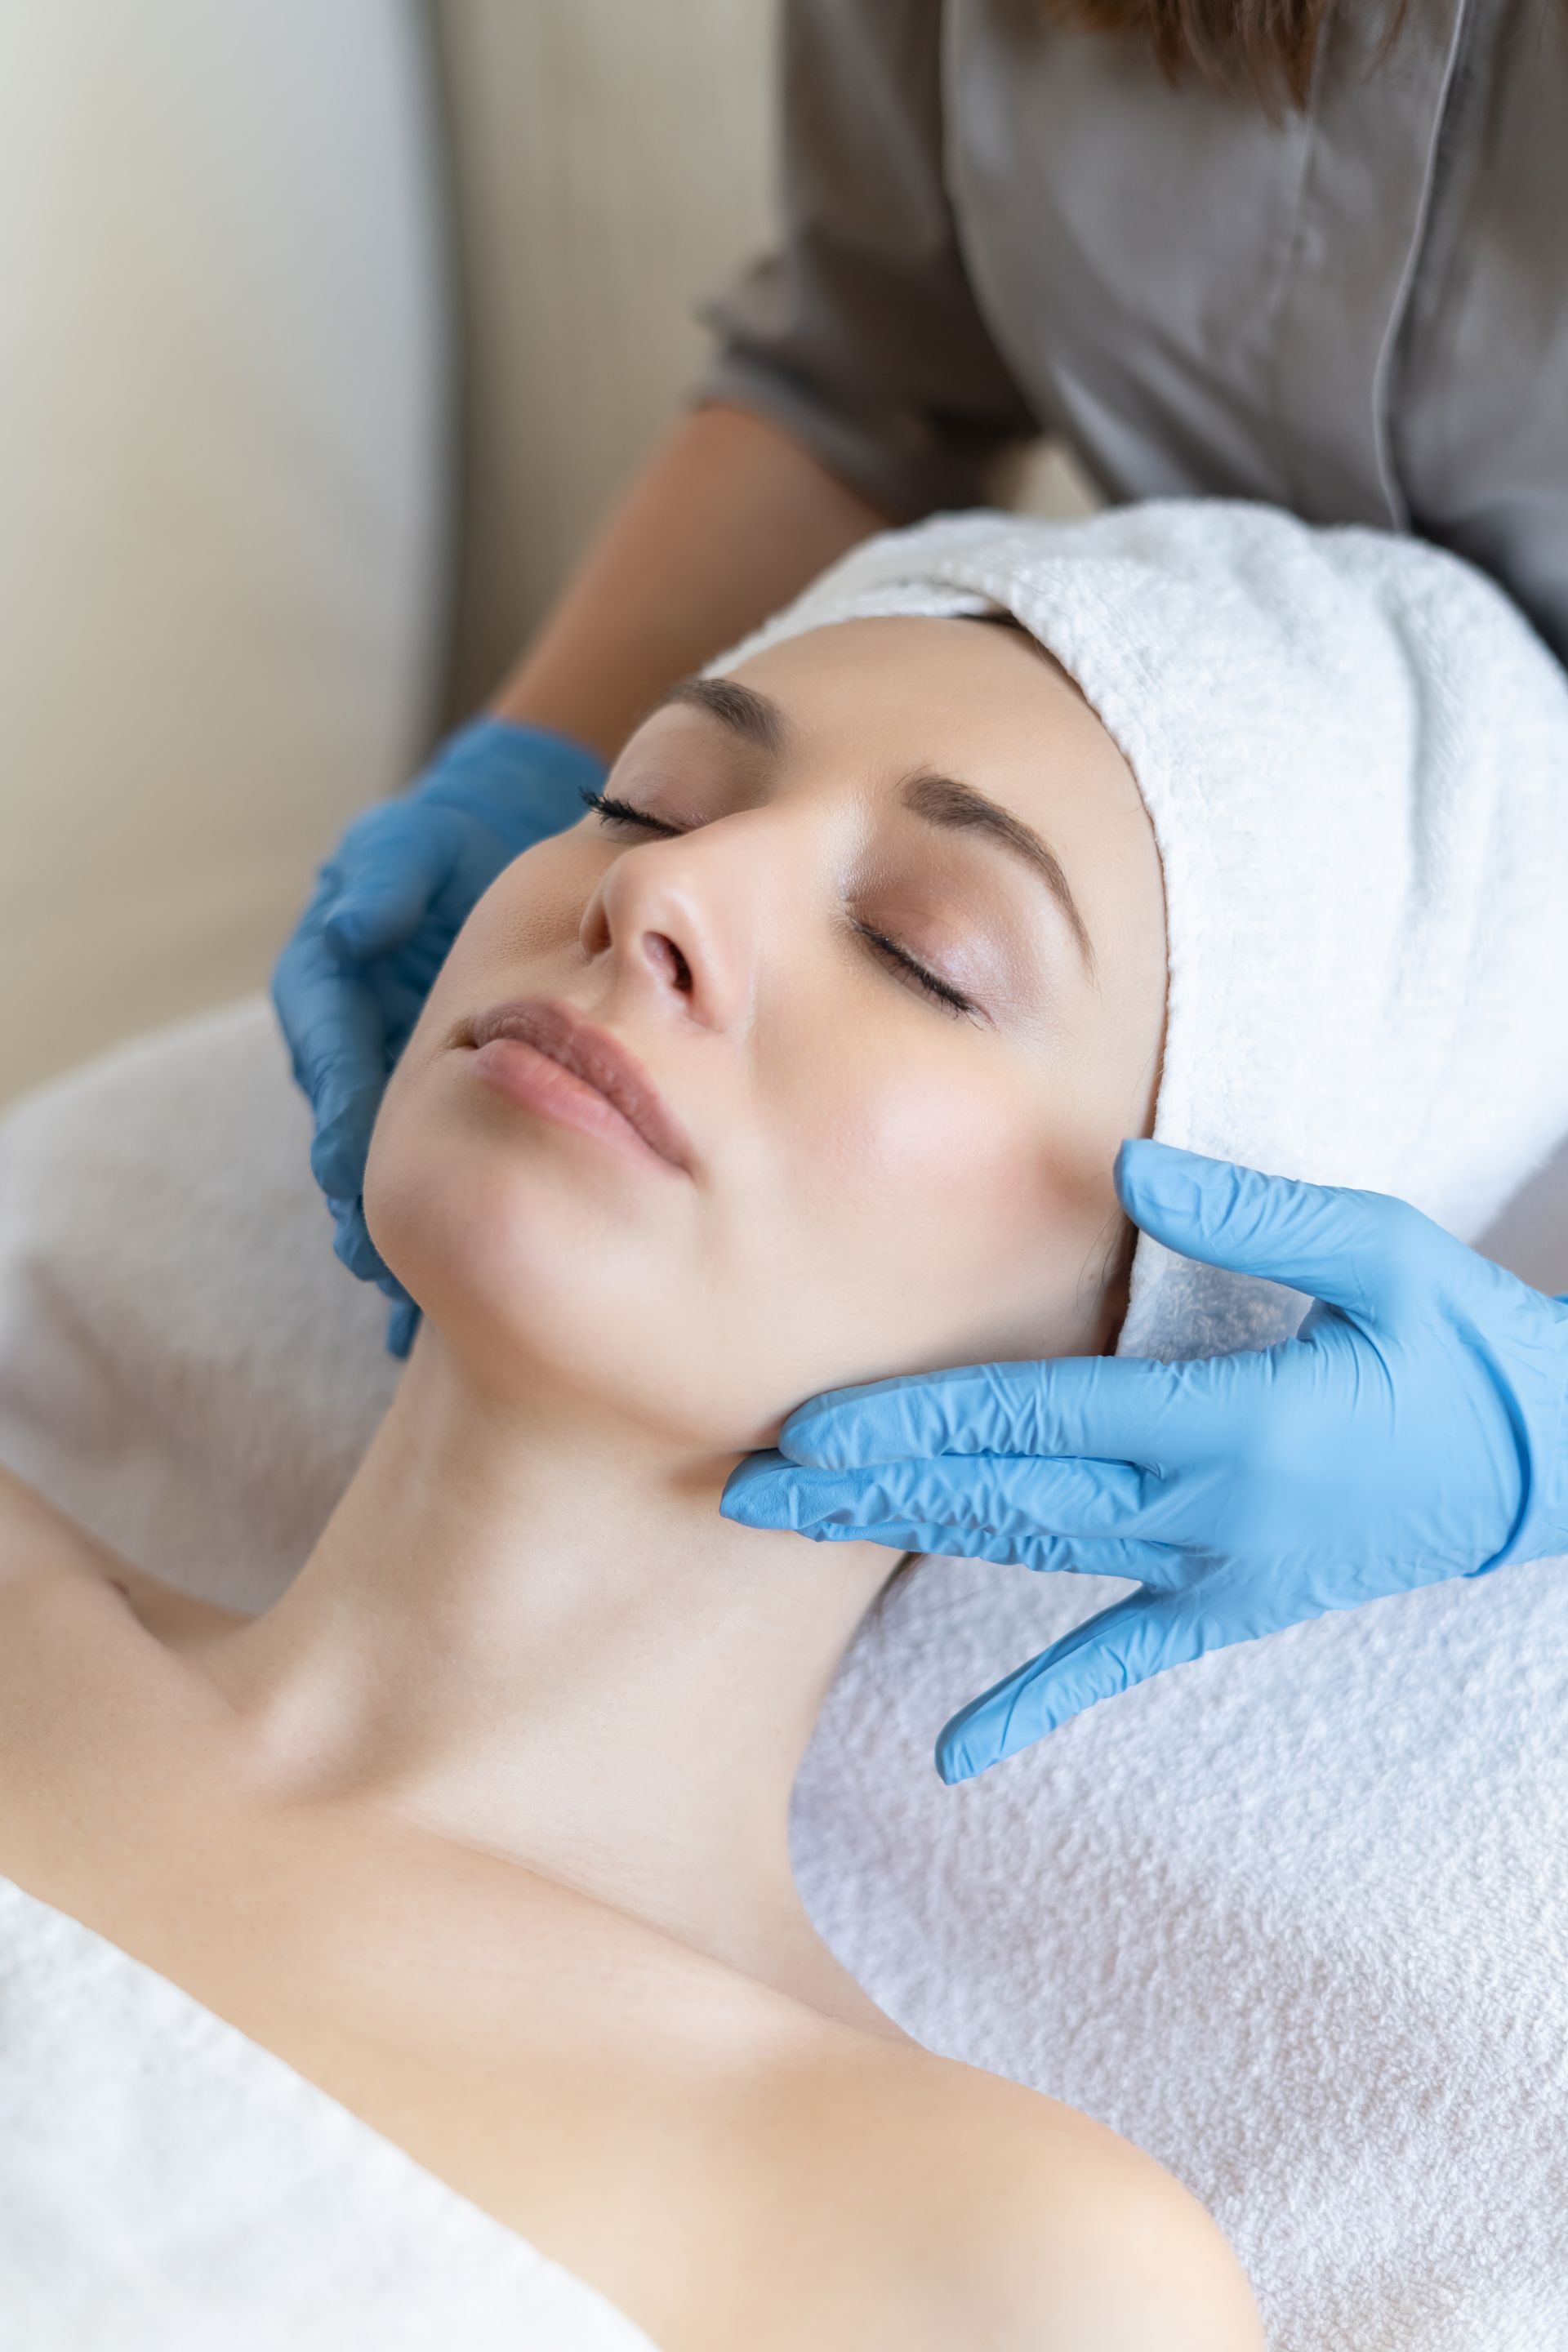 a woman is getting a facial treatment at a spa .